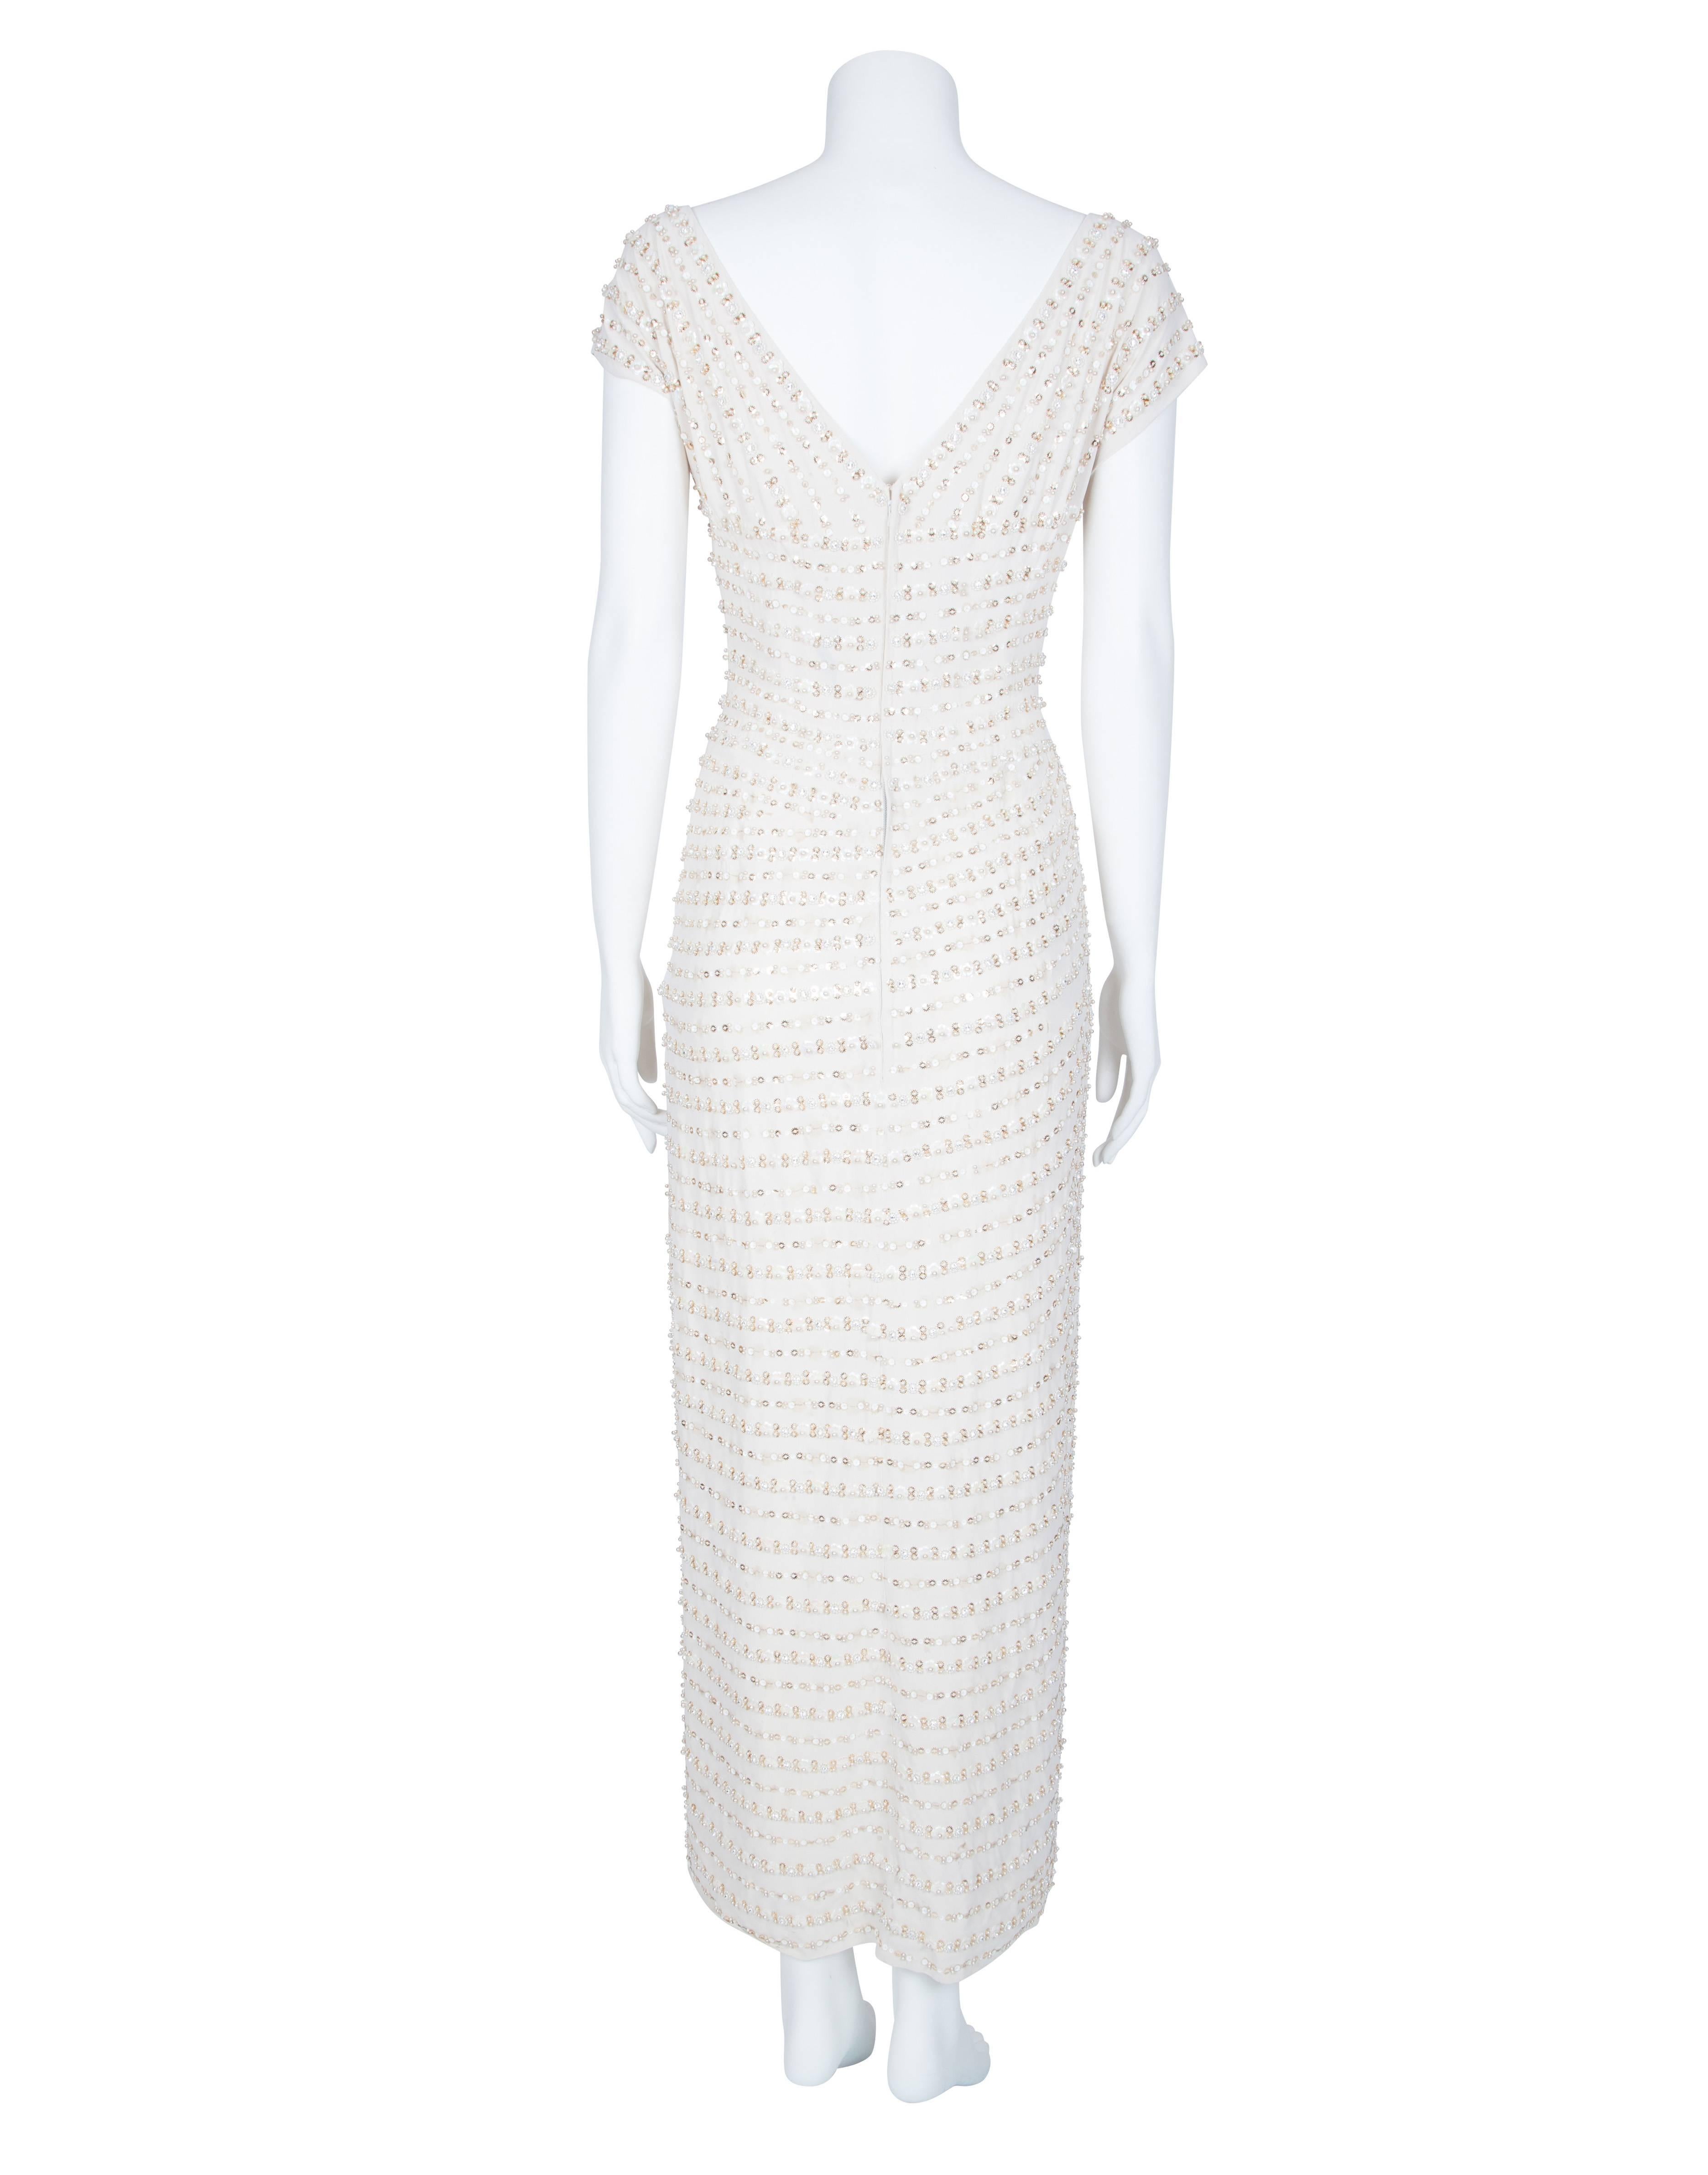 Women's 1950s Norman Hartnell Stunning Ivory Beaded Gown Approx Size UK 8 For Sale